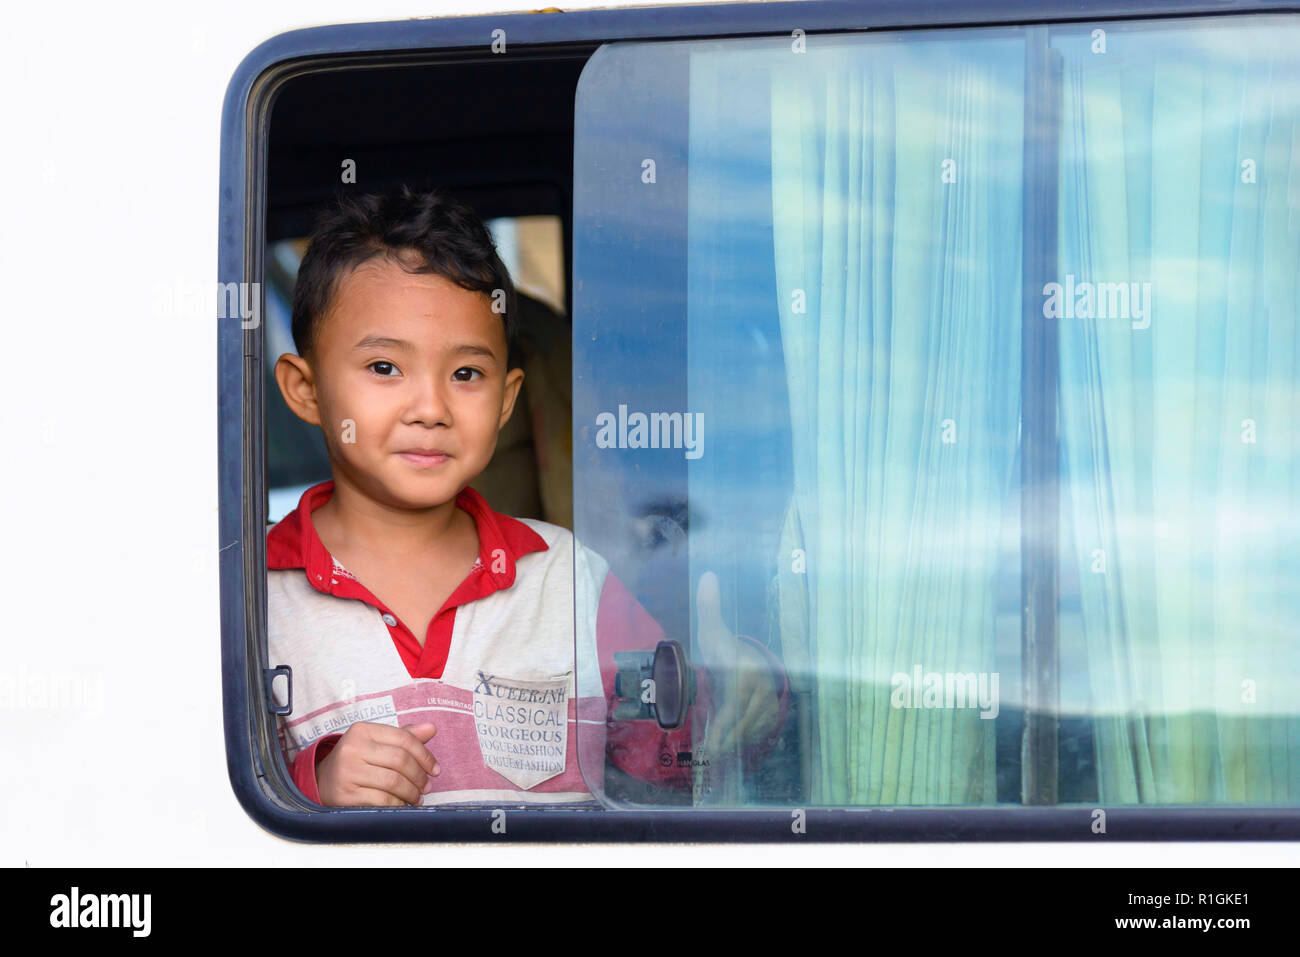 Phnom Penh, Cambodia - December 30, 2018: A cute little boy looking out of the window of his car in the street of Phnom Penh, the Cambodian capital Stock Photo